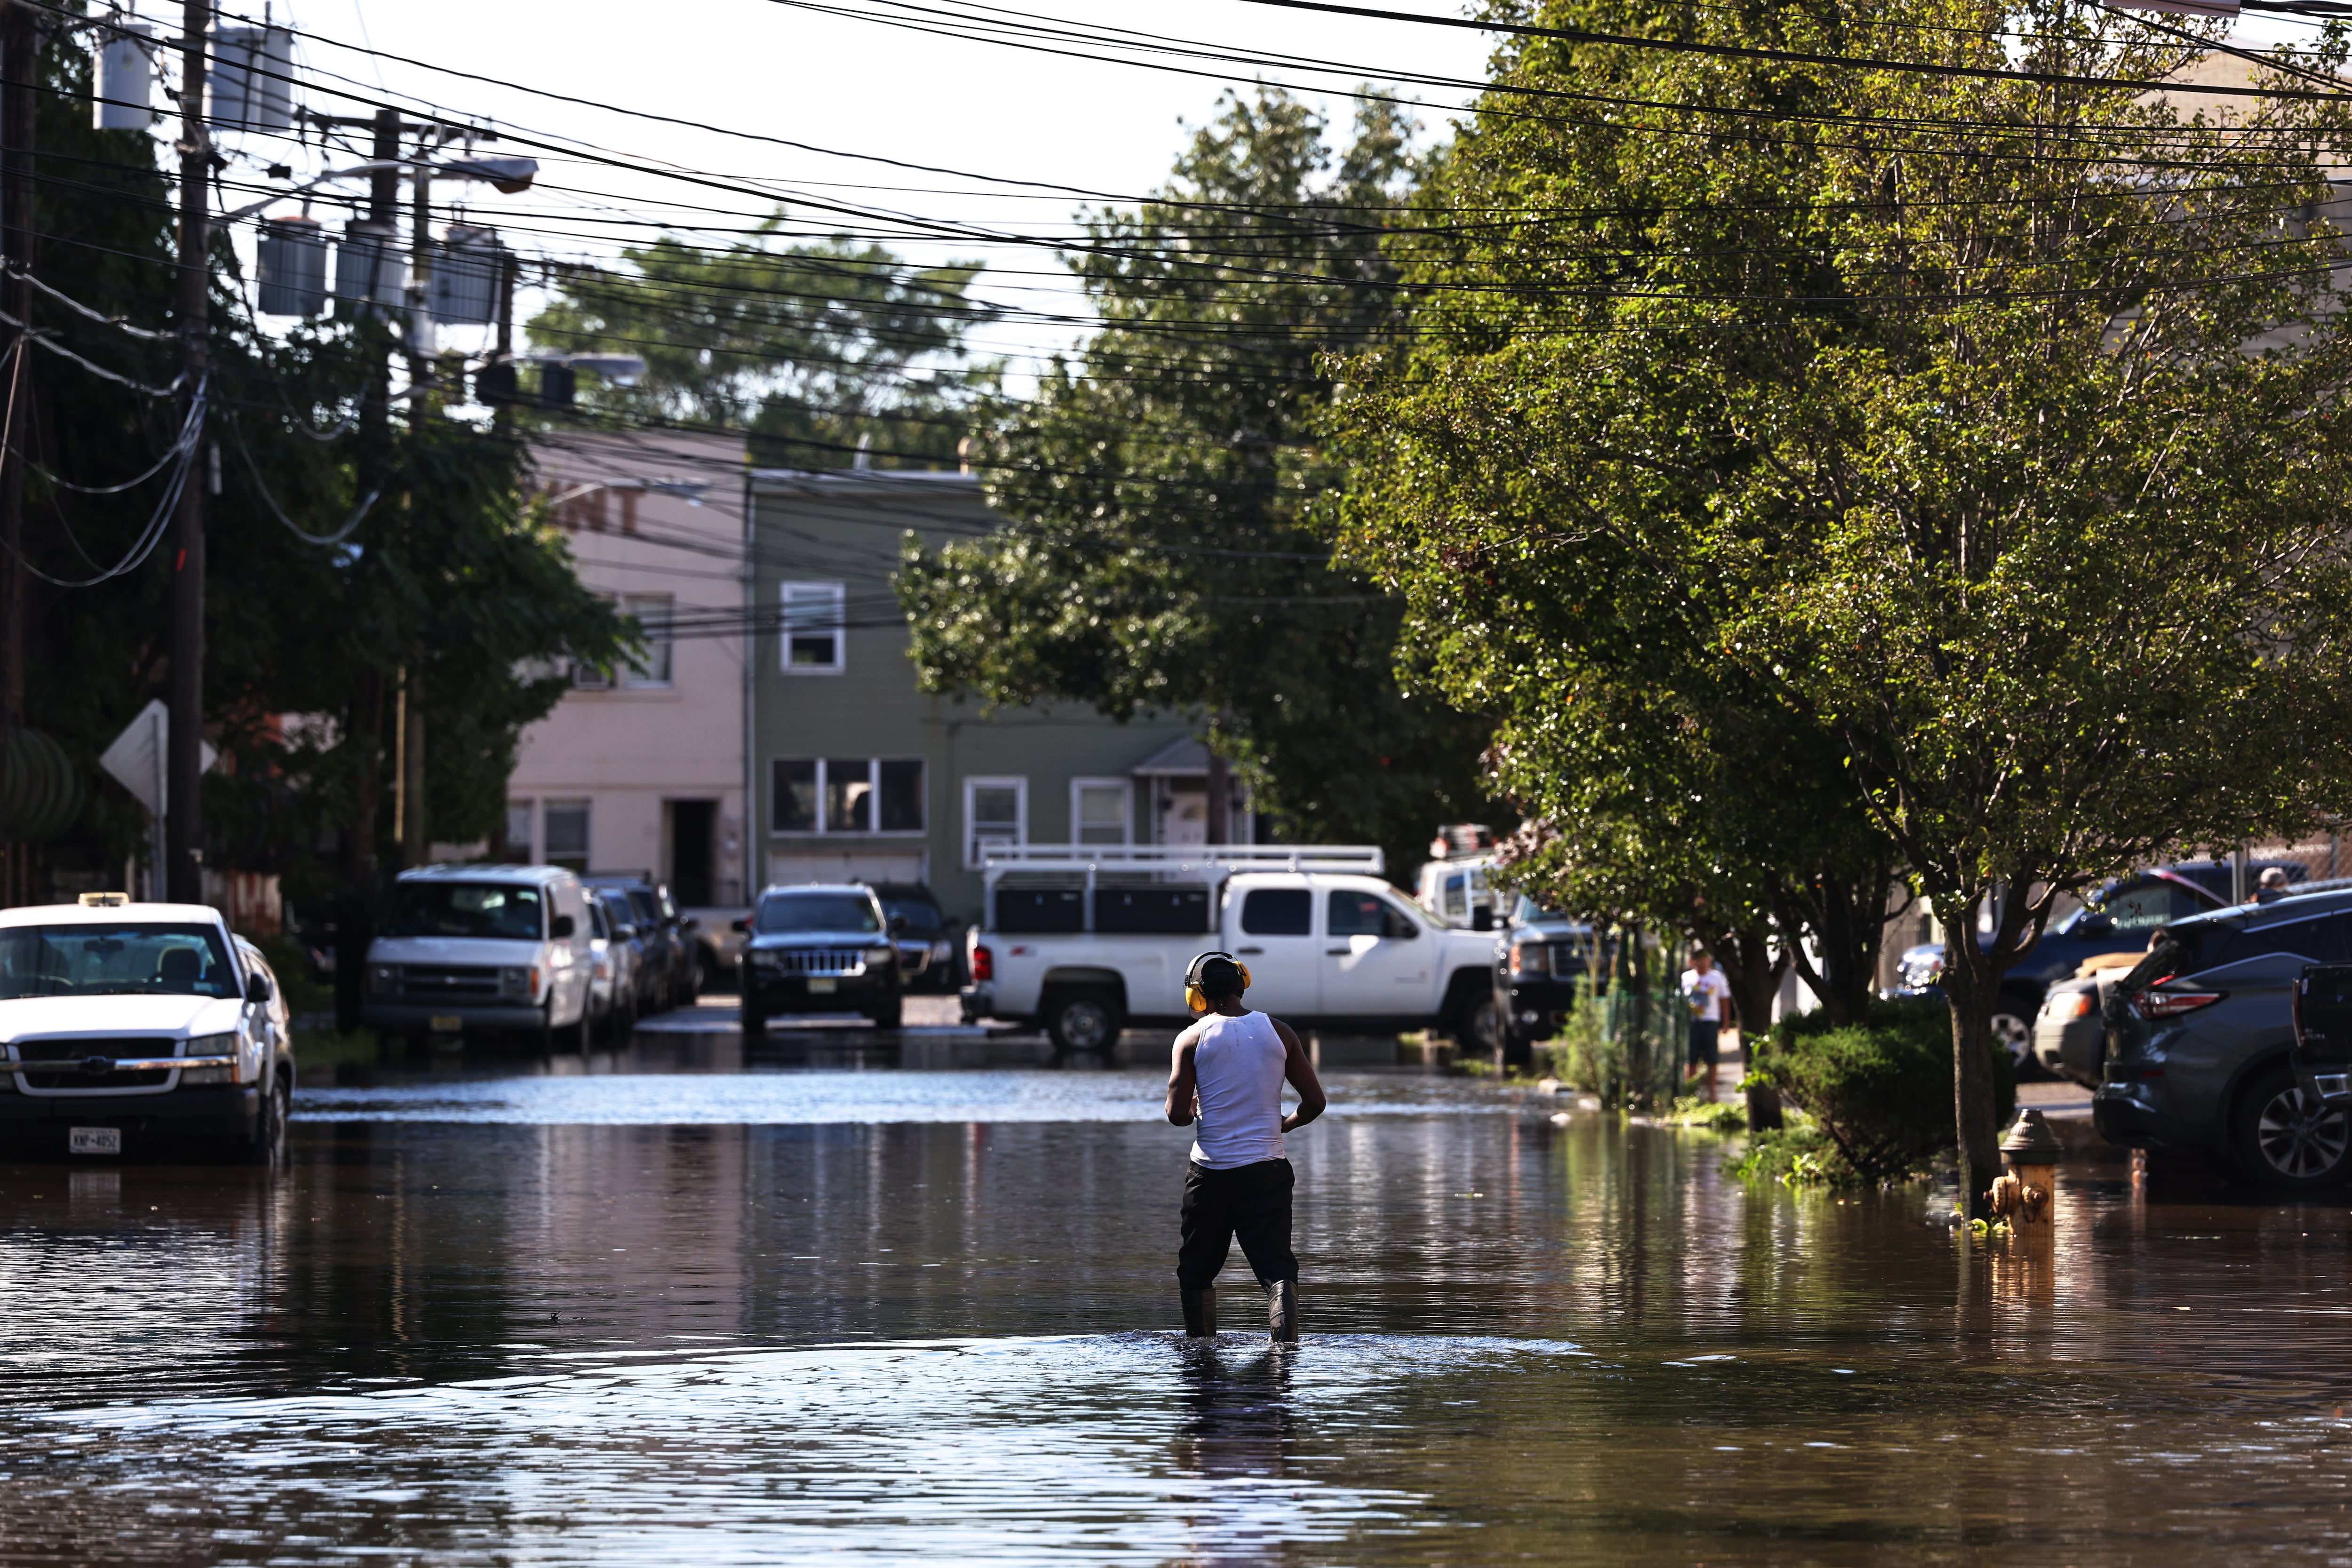 A man walks down a flooded street, lined with cars and large green trees.